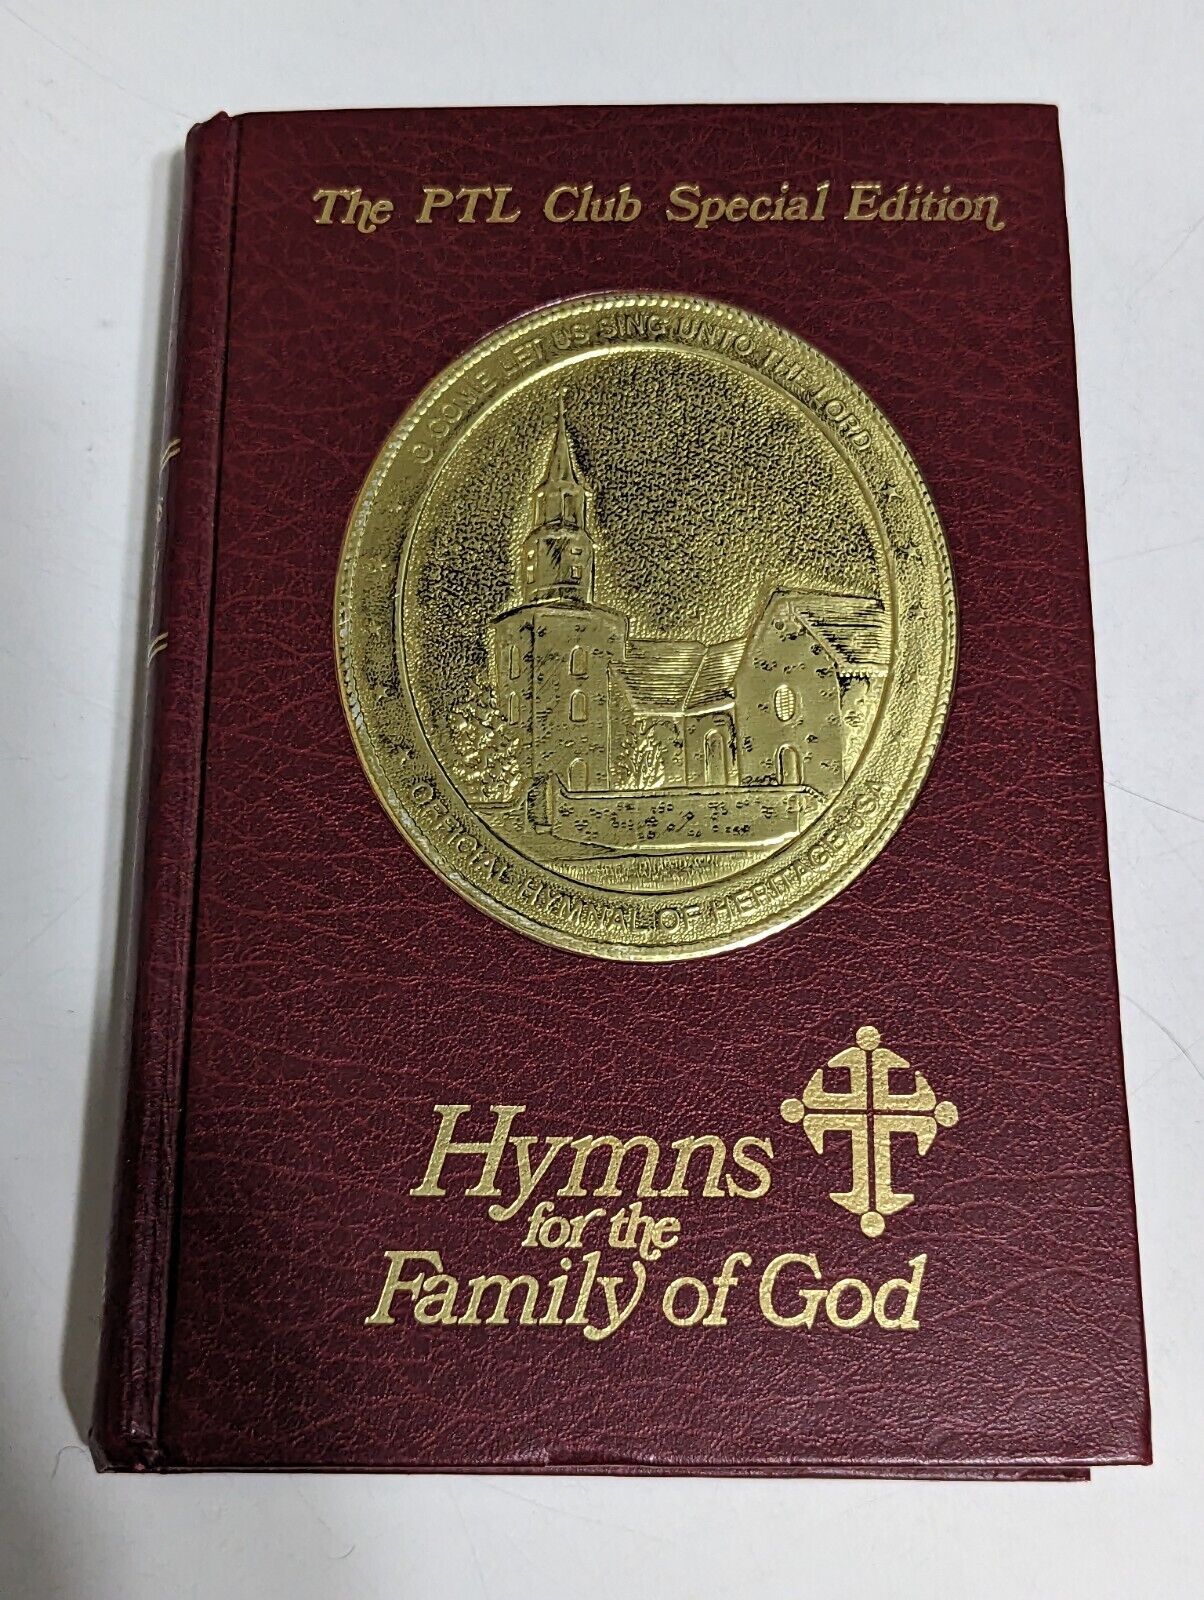 HYMNS of the FAMILY of GOD PTL Copyright 1976 CHURCH HYMNAL Hardback Book